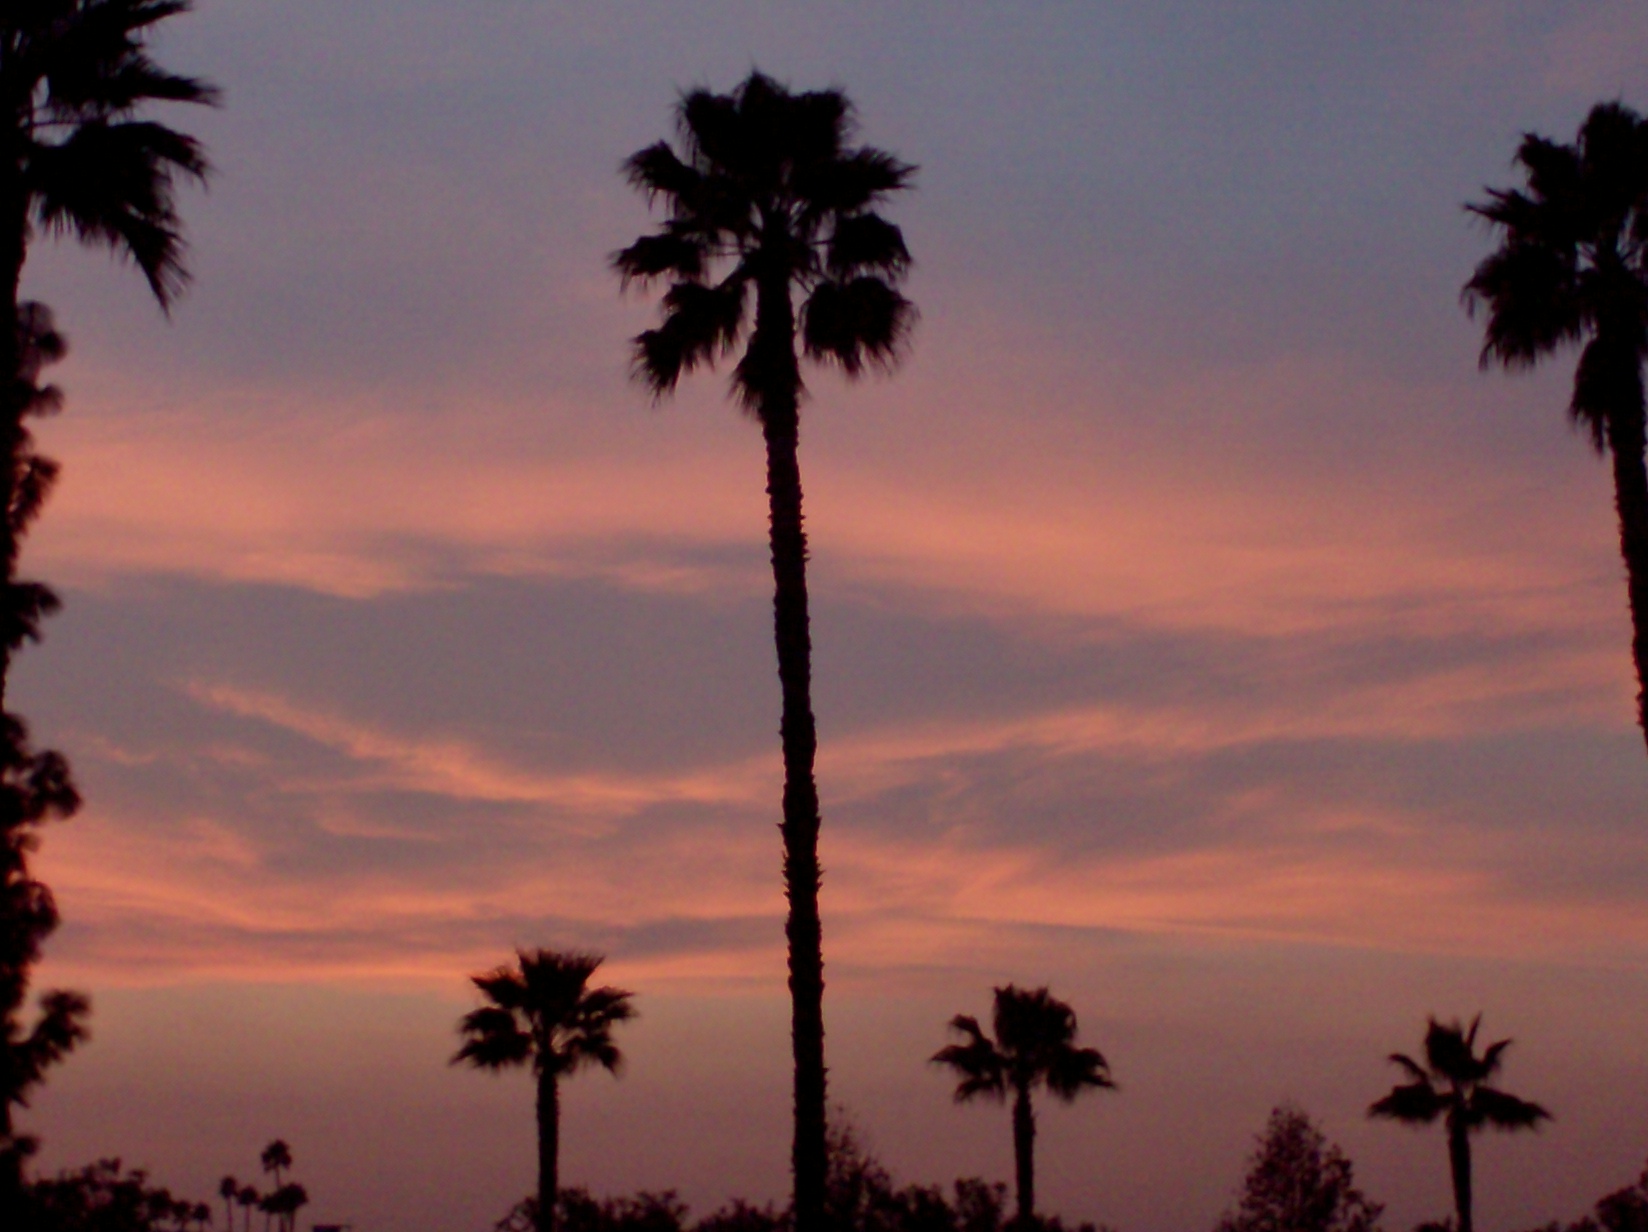 some palm trees and the sun sets in the background